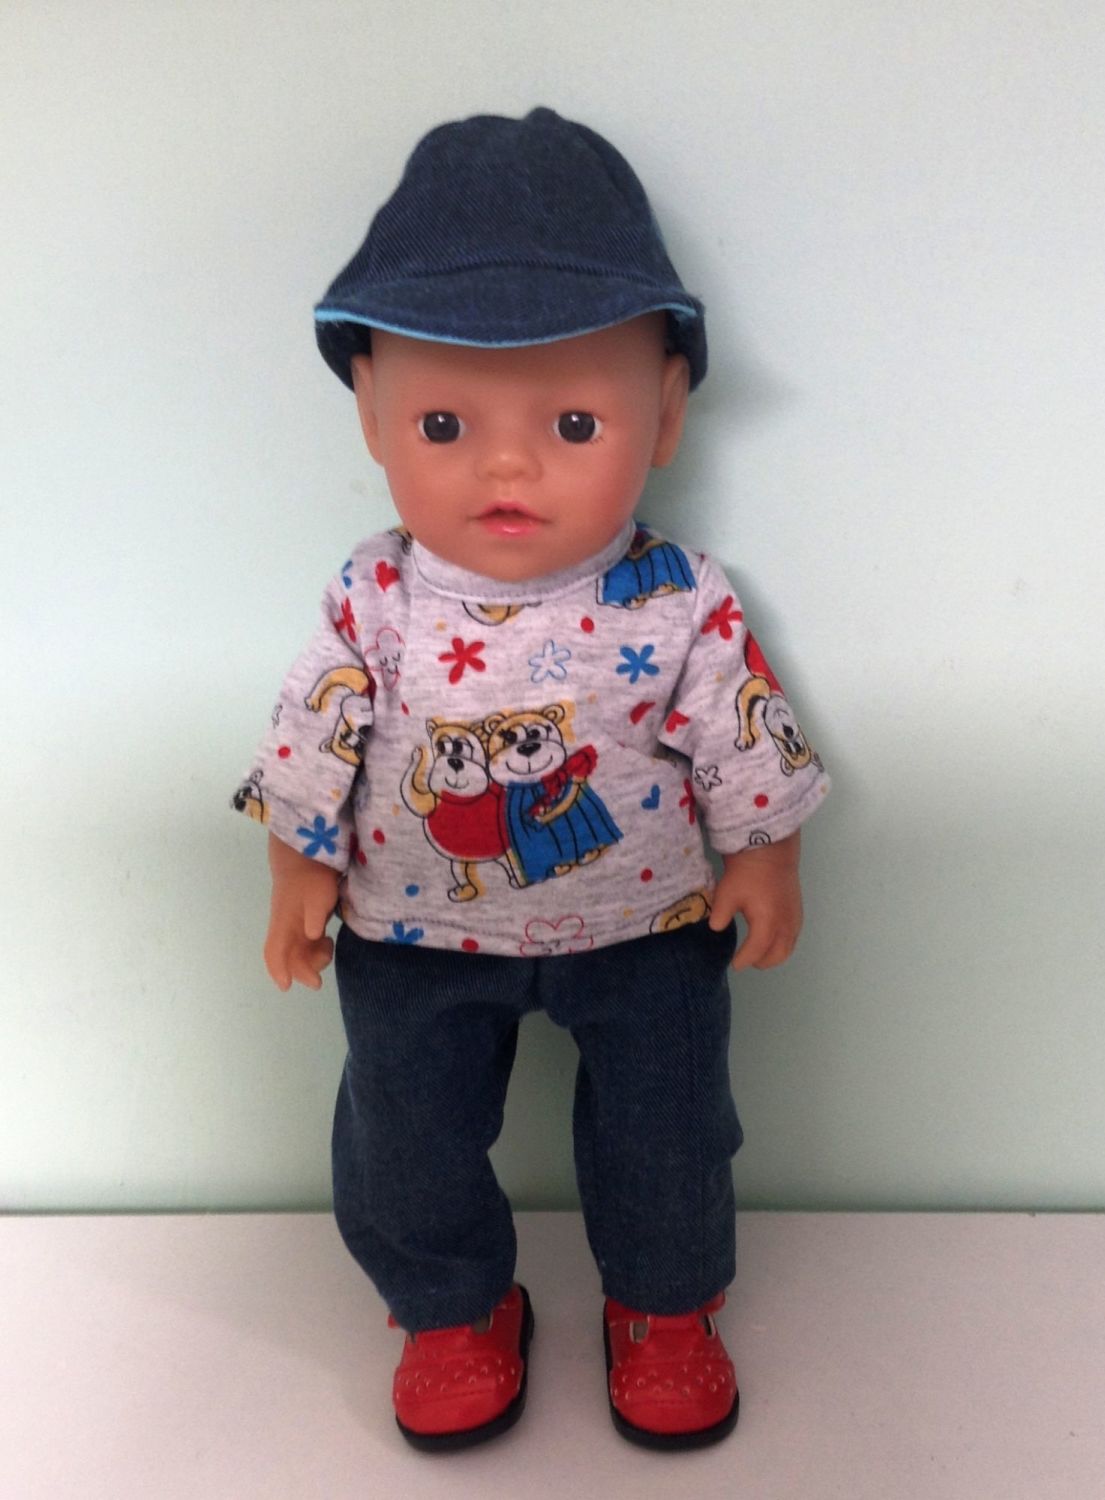 Doll's tee shirt,jeans and peak cap made to fit a 12 inch high baby doll. 